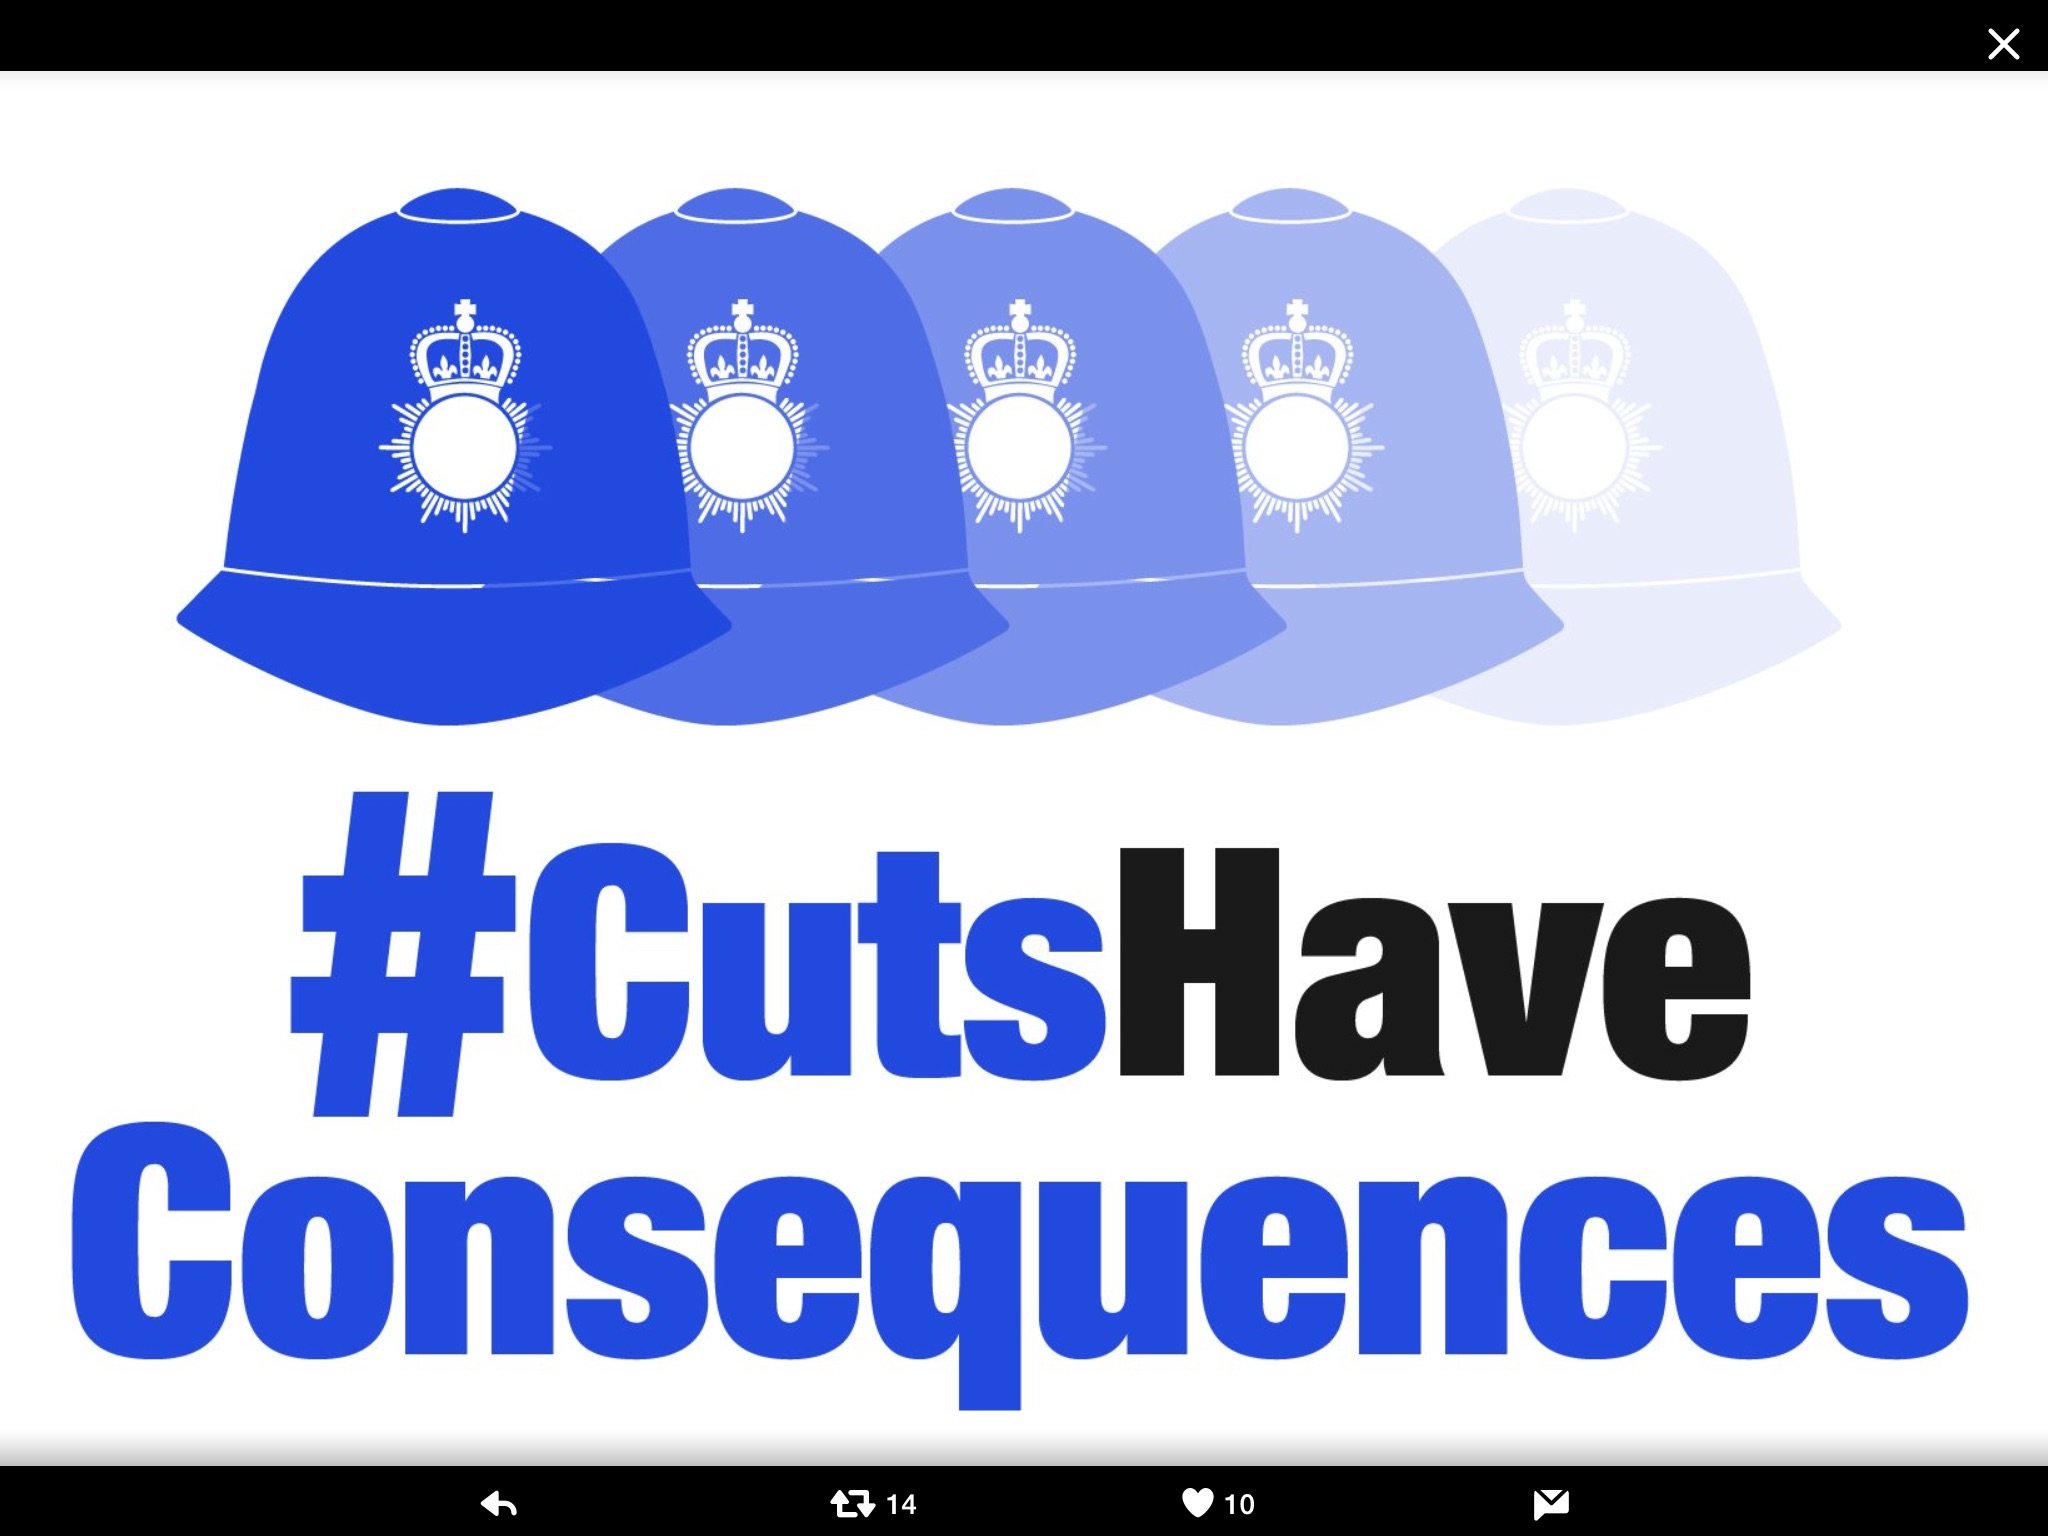 please sign petition to stop police cuts